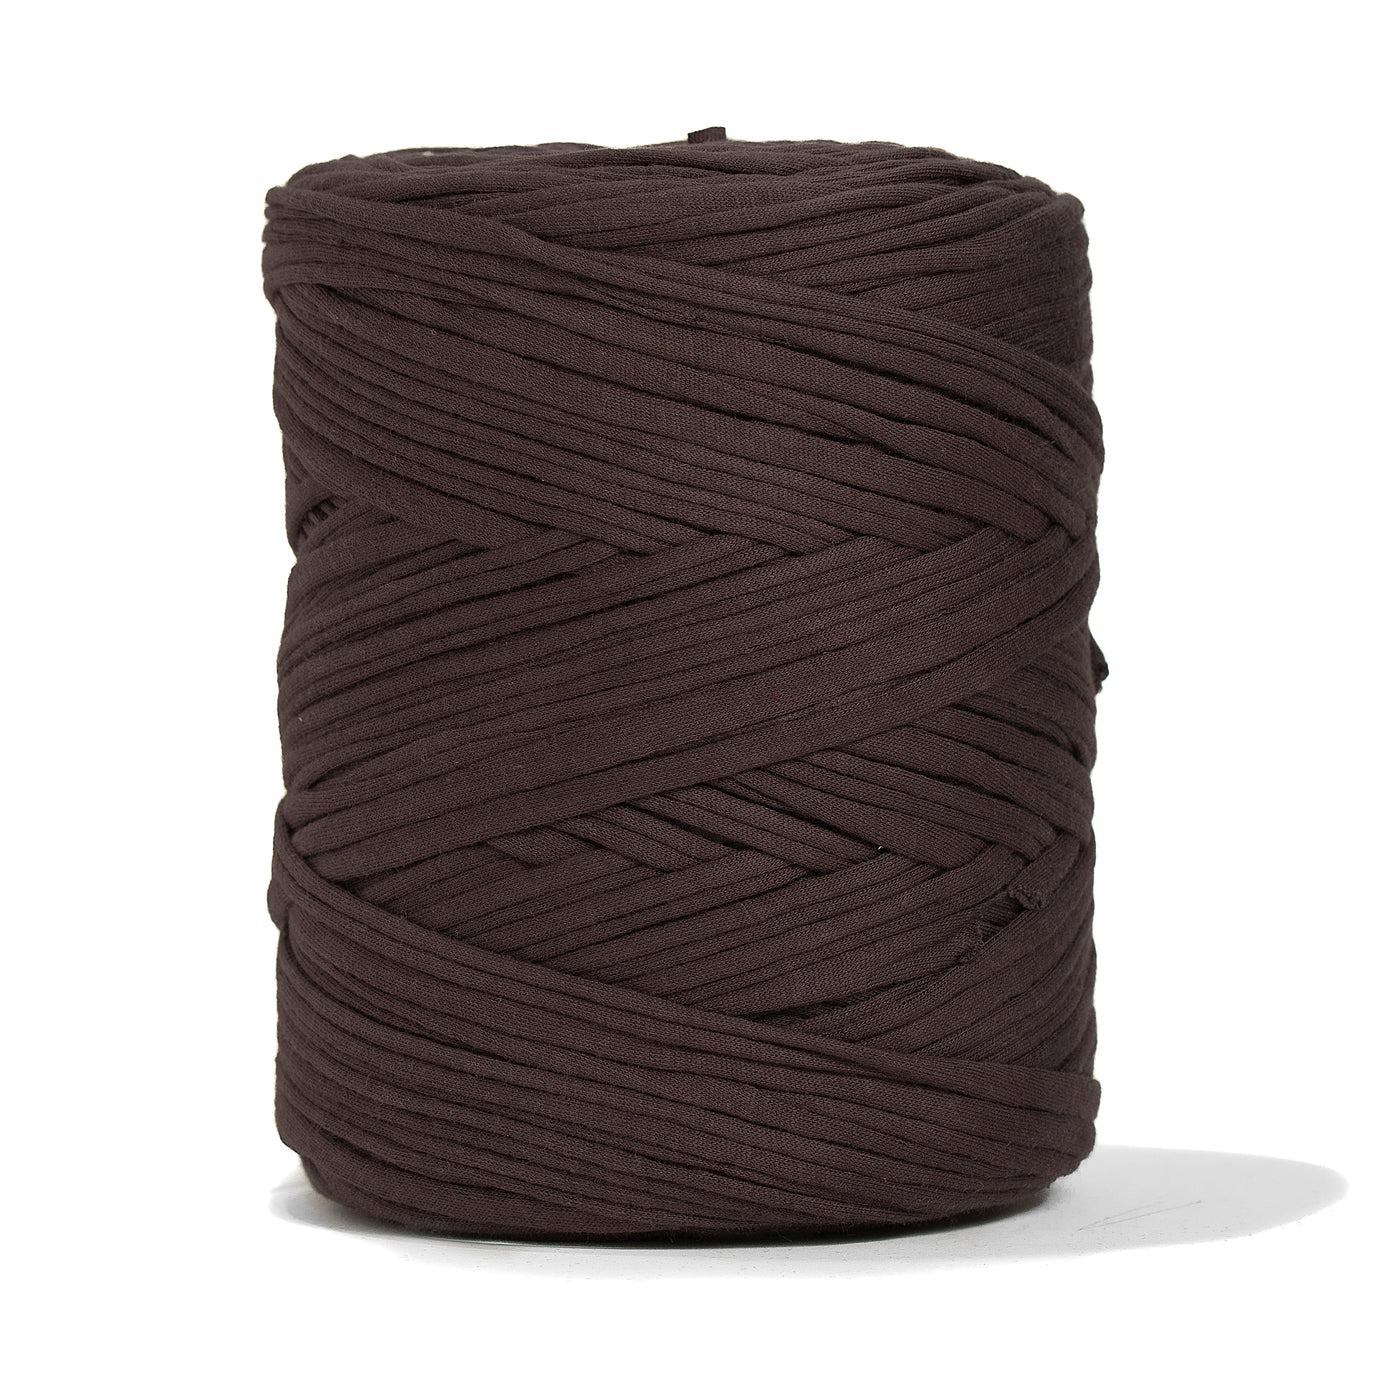 Recycled T-Shirt Fabric Yarn - Chocolate Color